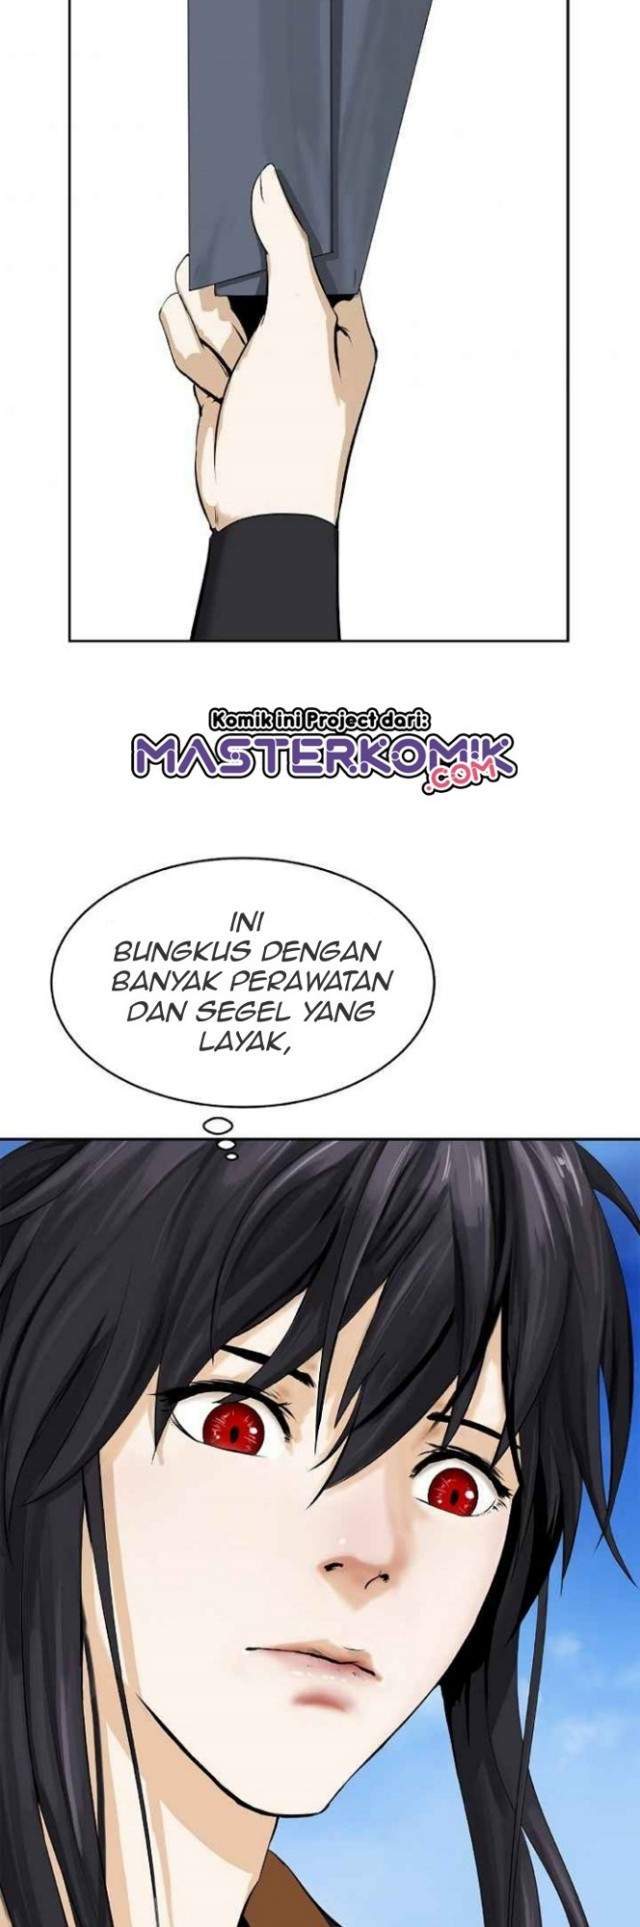 Cystic Story Chapter 19 8